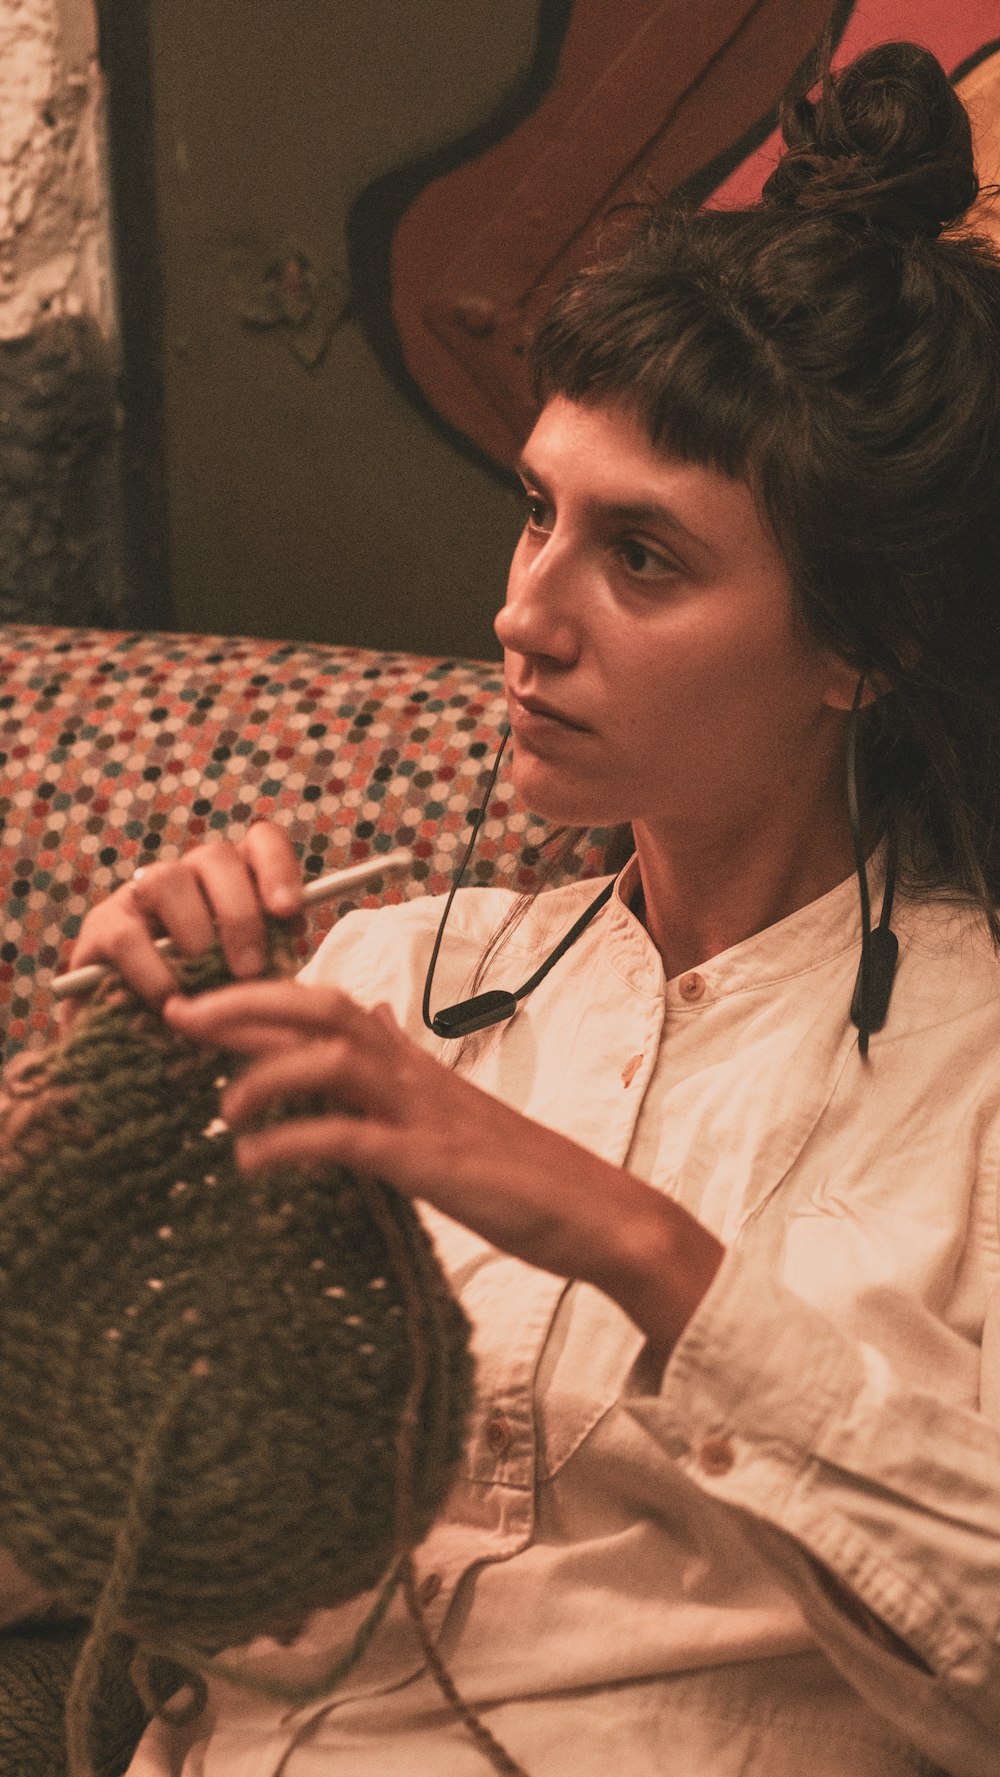 a woman sitting on a couch holding a ball of yarn